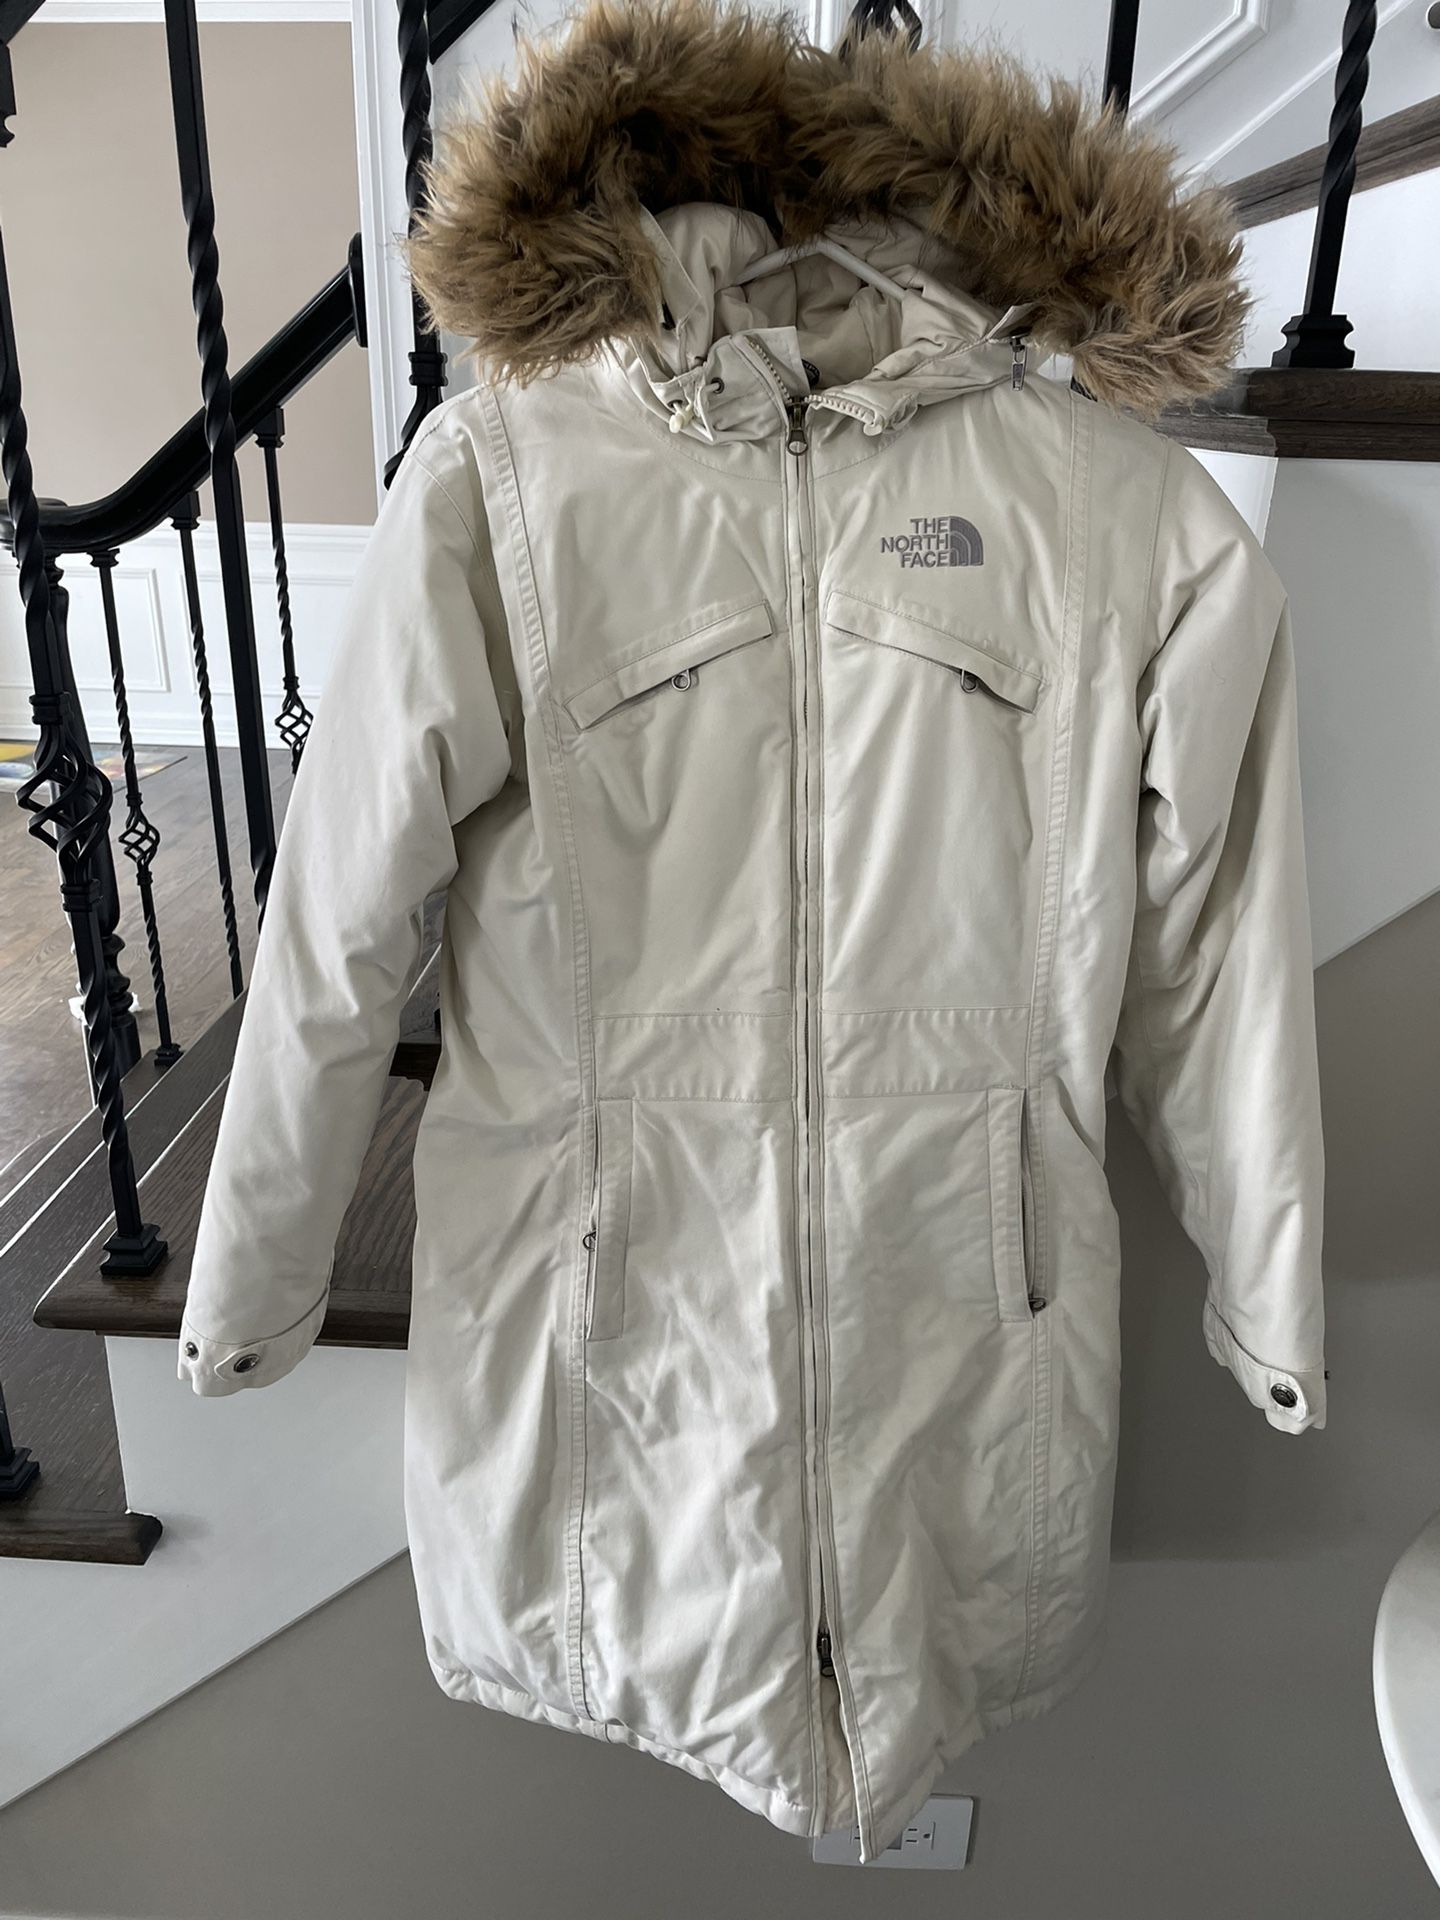 The north face parka size xs